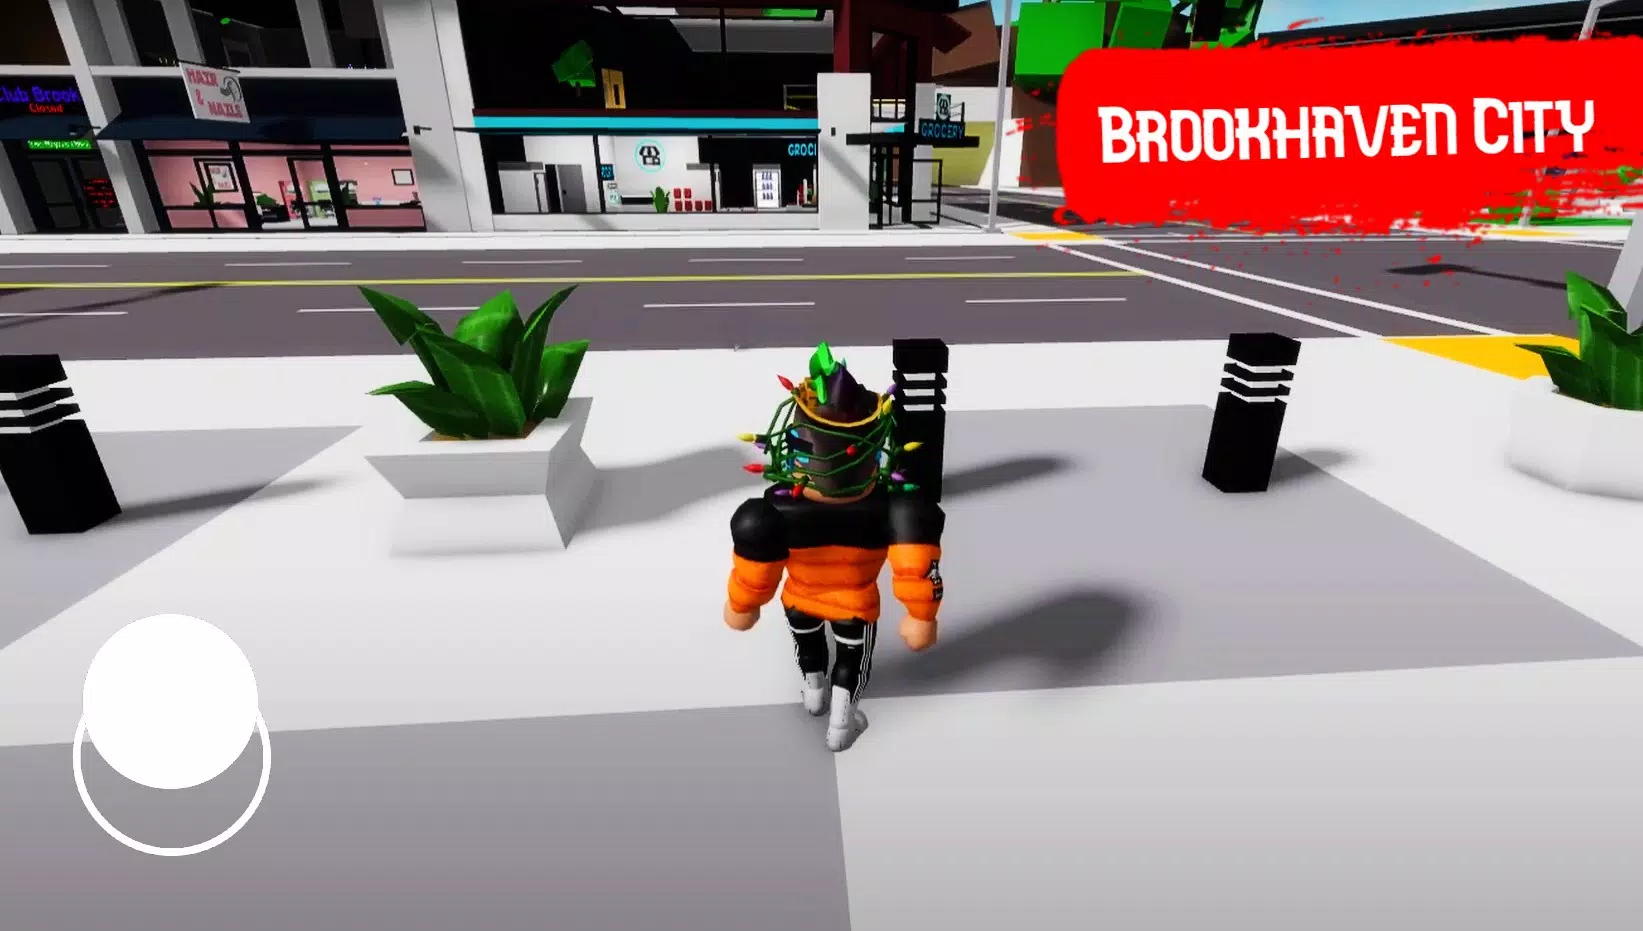 5 tips to know when playing Roblox Brookhaven RP